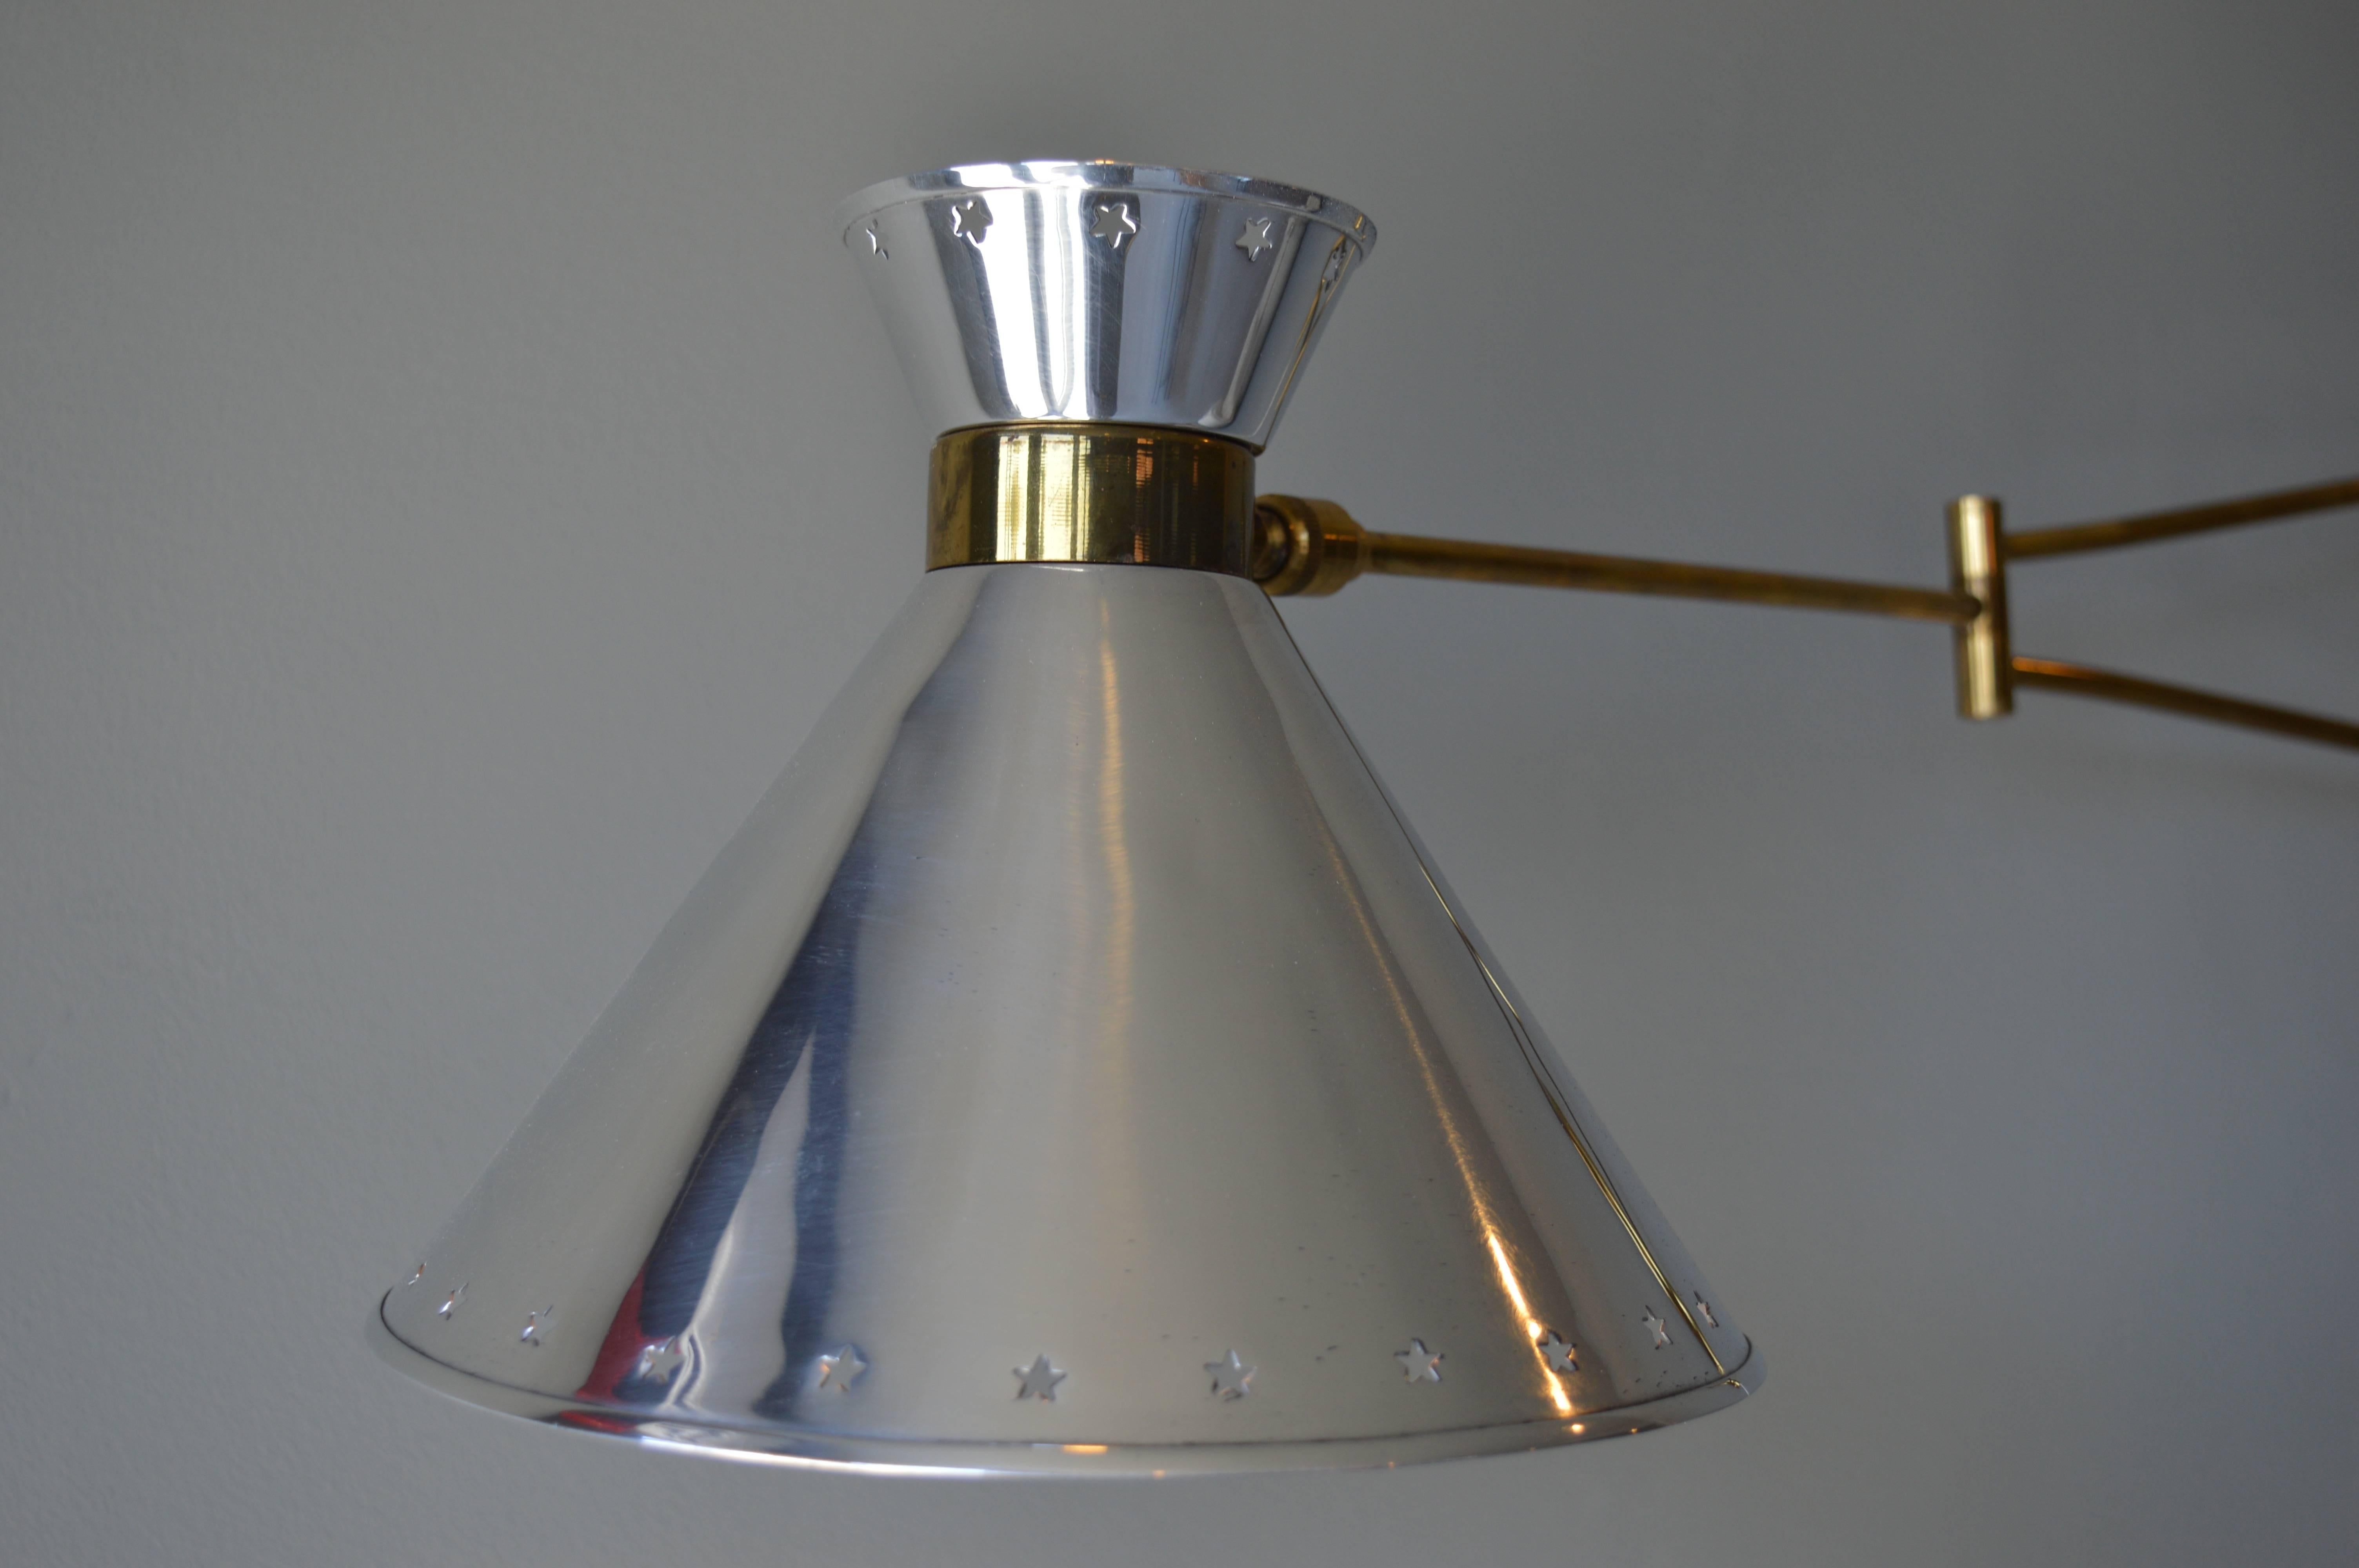 Handsome wall sconce by Lunel. Black backplate, with brass arms and hardware and polished aluminum shade. Newly wired with red cloth cord. Excellent vintage condition.